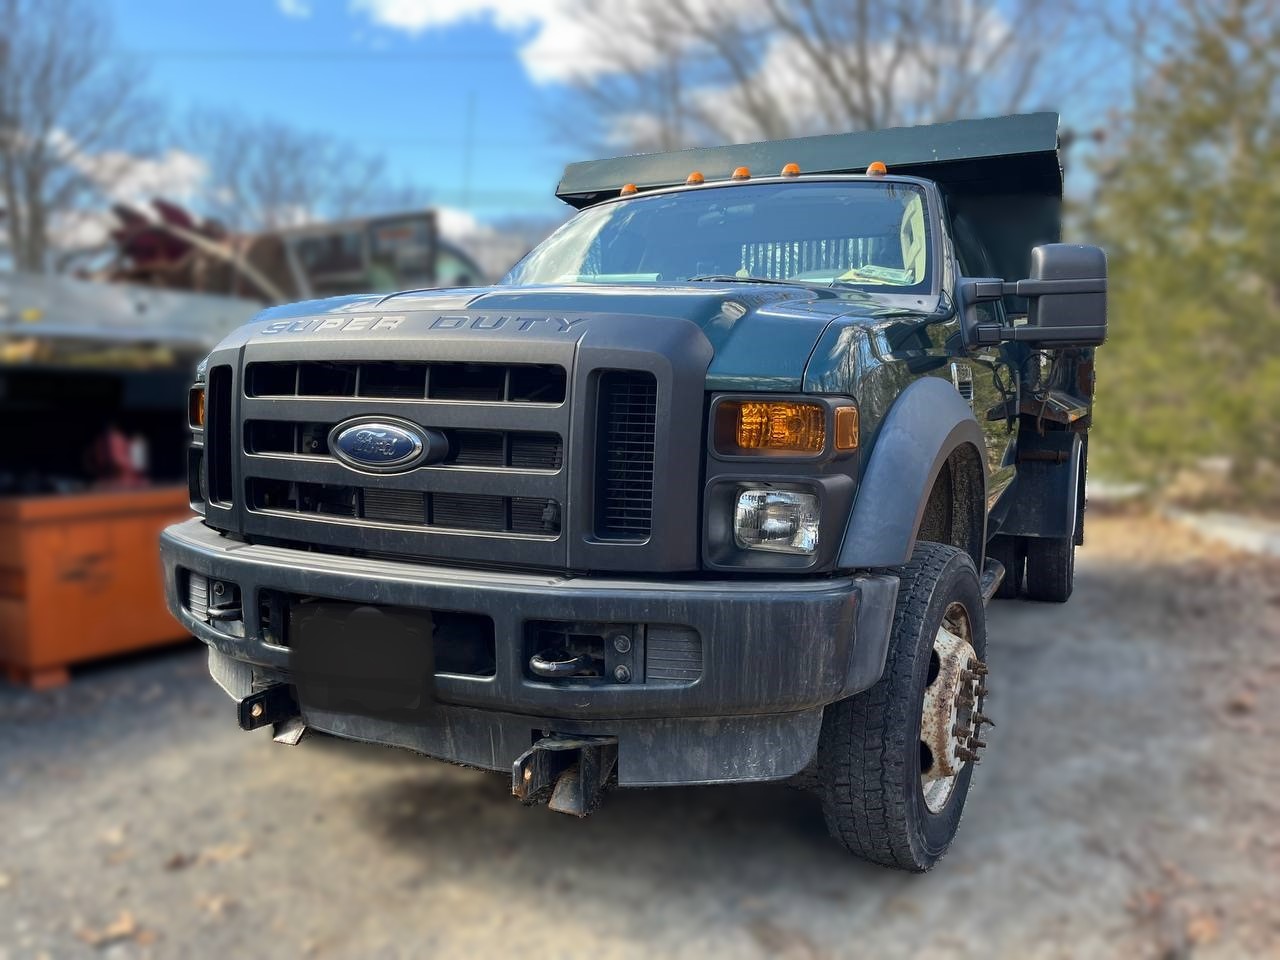 Ford F550 XL Dump Truck. 2008 medium duty truck with a 6.8L Triton super duty V10 gas engine with only 32,400 miles. Automatic transmission with 4x4 wheel drive. It has a 141 inch wheelbase. 19,500 GVW. Set up for plowing